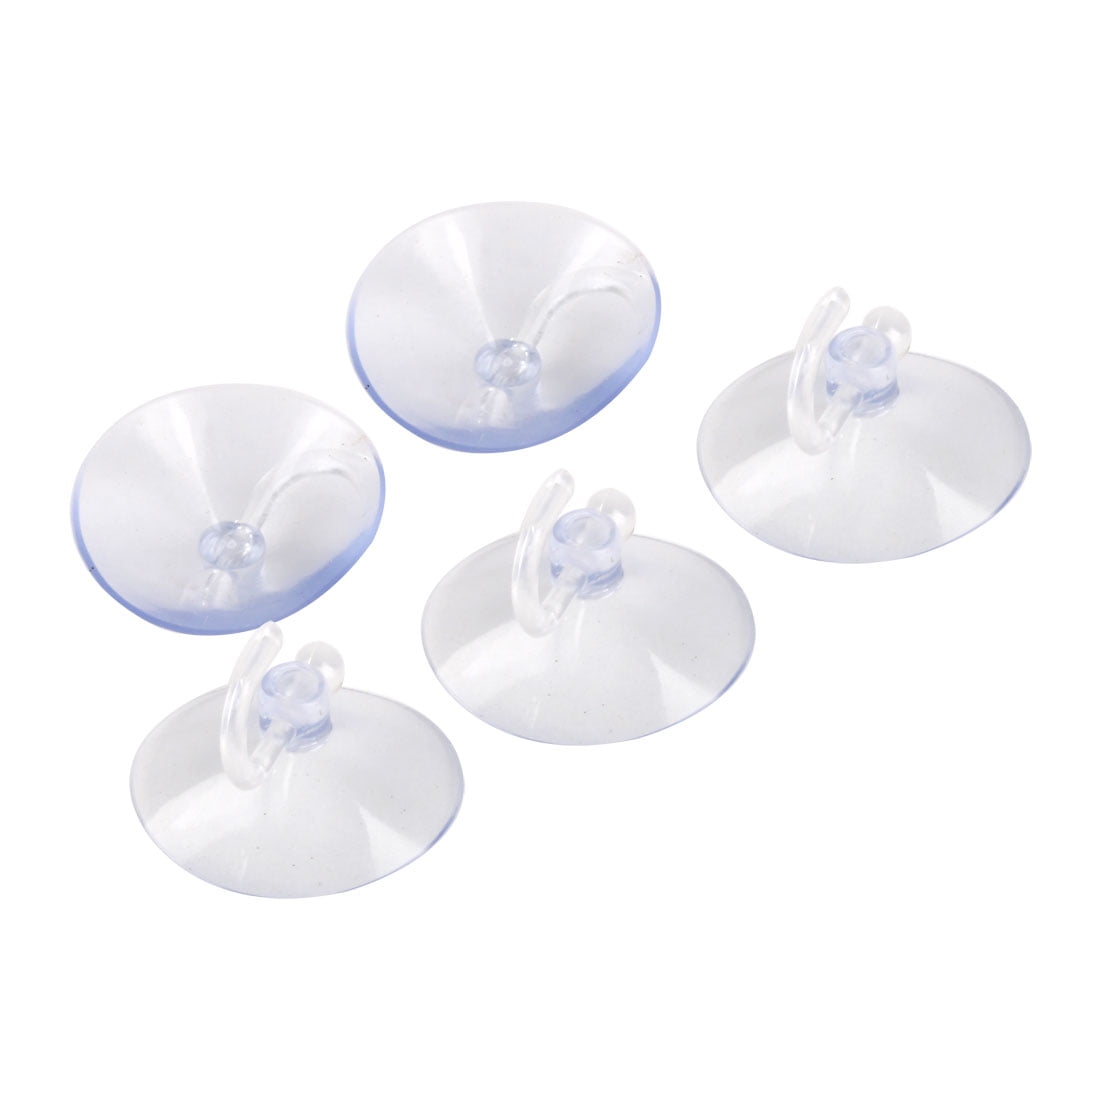 1.7 inch Diameter Vacuum Suction Holder Transparent Wall Hook Sucker Plastic Removable Suction Cup for Kitchen Bathroom Winkey 12Pcs Suction Cup Hook 